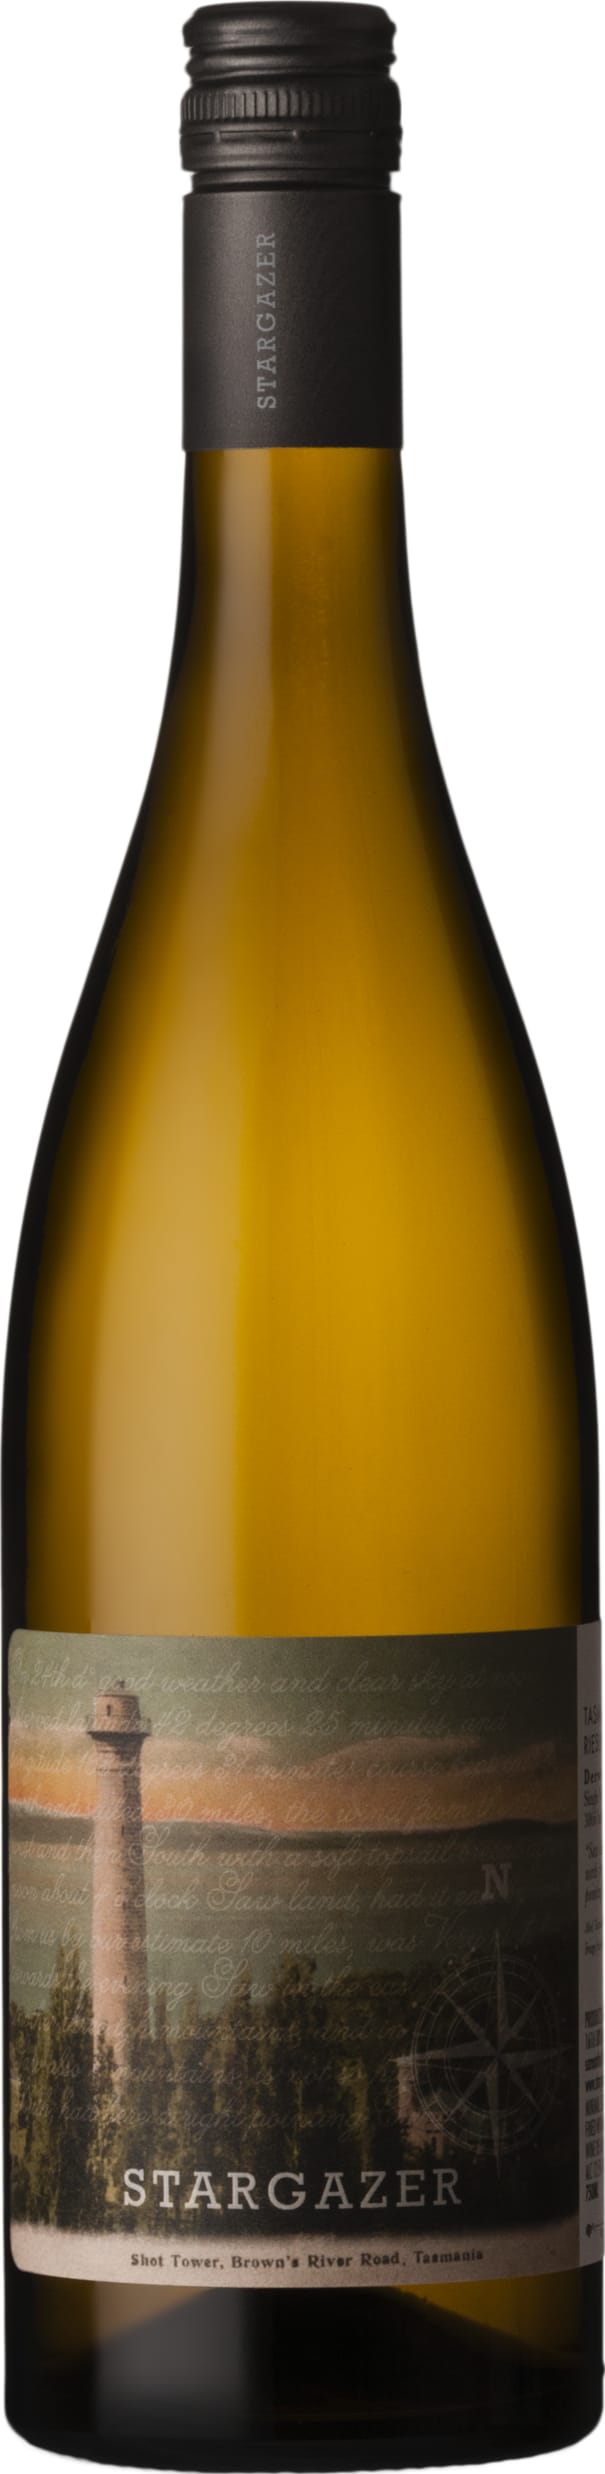 Stargazer Riesling 2023 75cl - Buy Stargazer Wines from GREAT WINES DIRECT wine shop